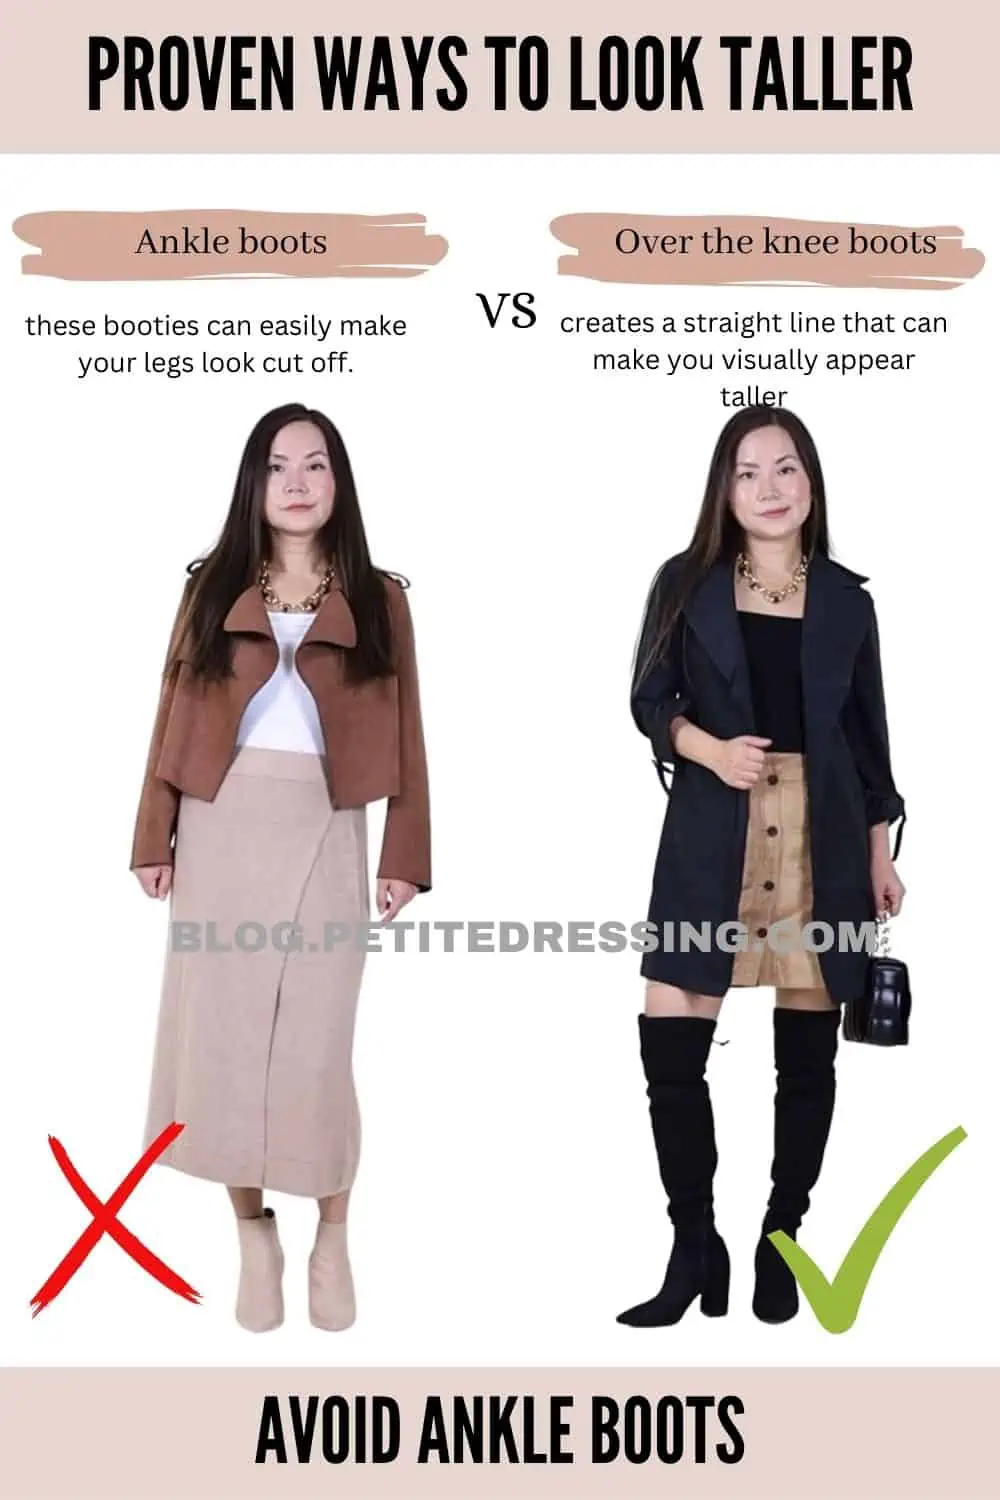 Stylist Shares How to Improve Outfits to Make Me Look Slimmer, Taller